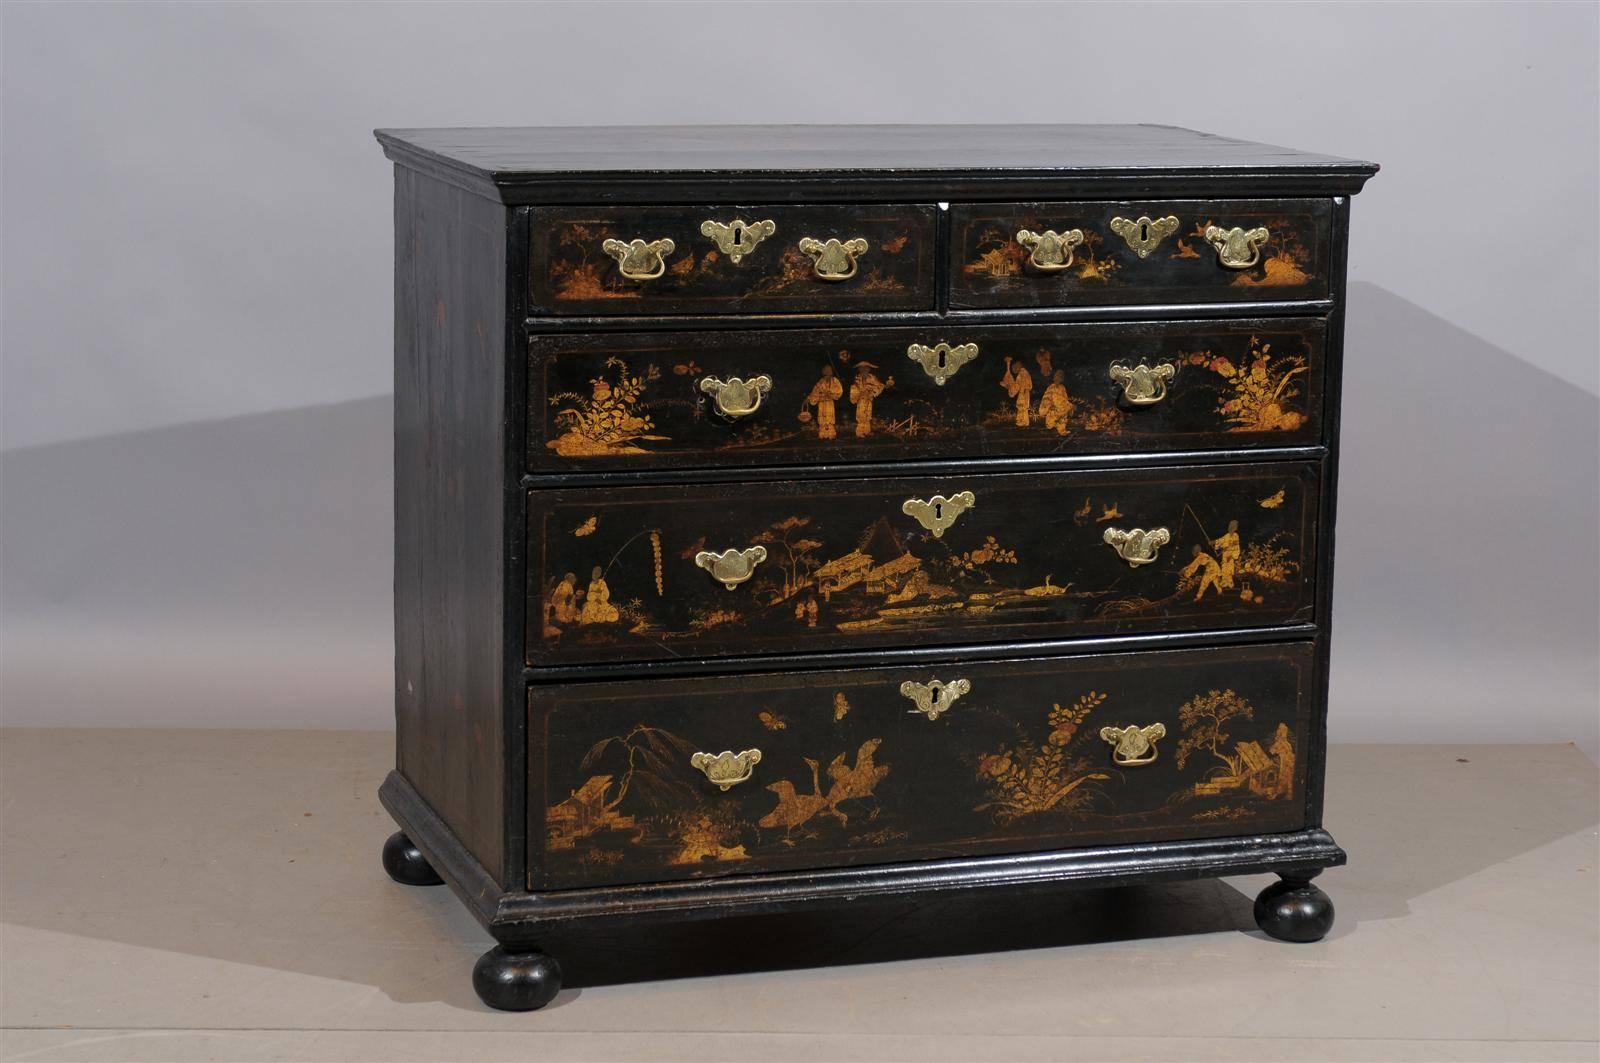 18th century English chinoiserie lacquered chest with bun feet, five drawers and brass bailpulls.